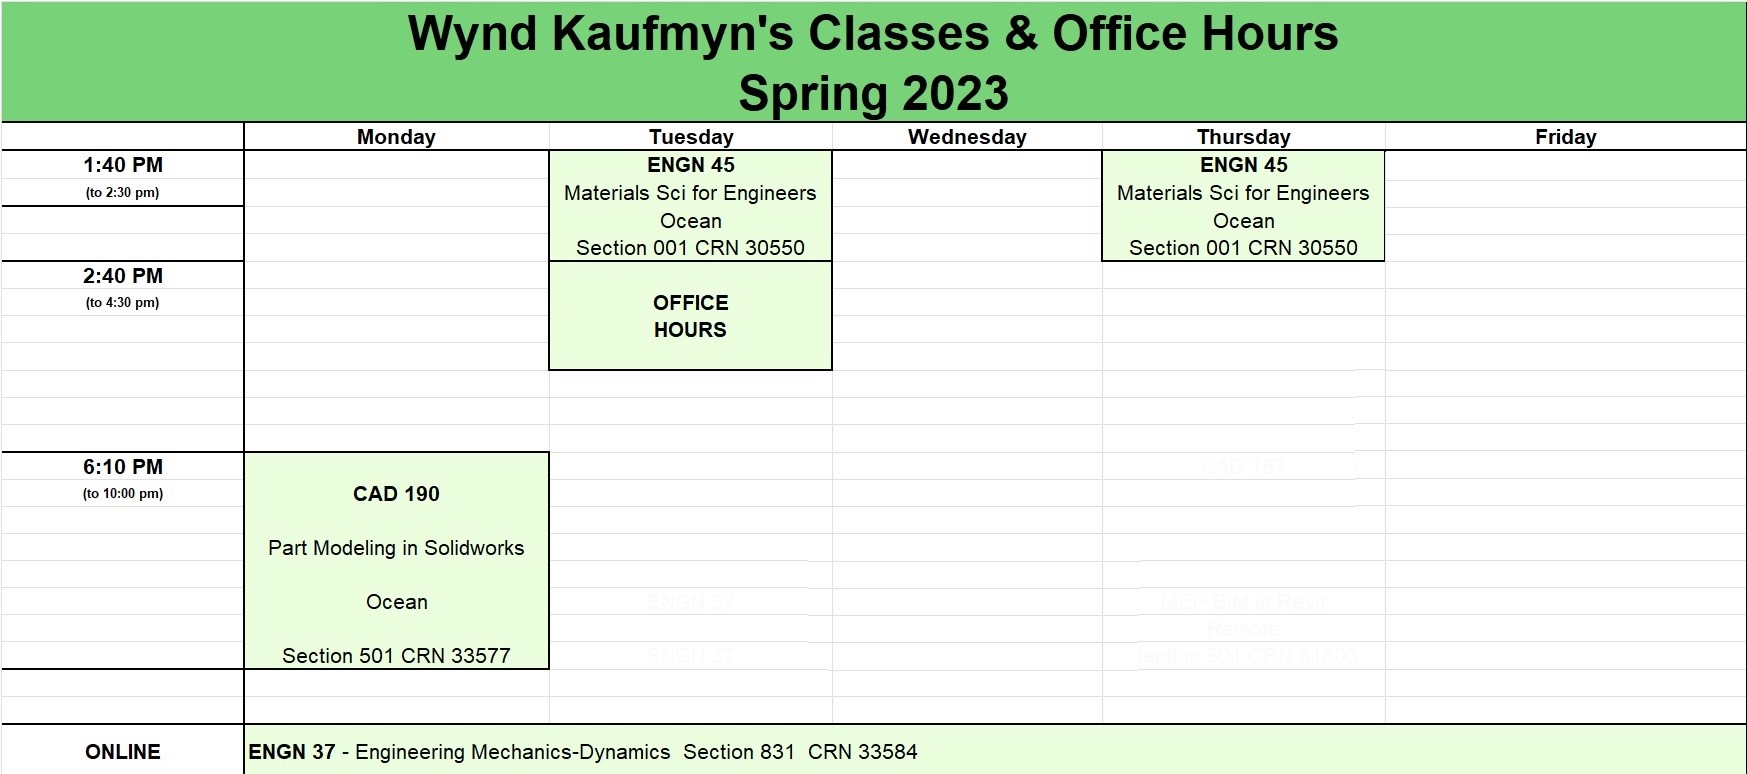 Wynd's schedule of classes